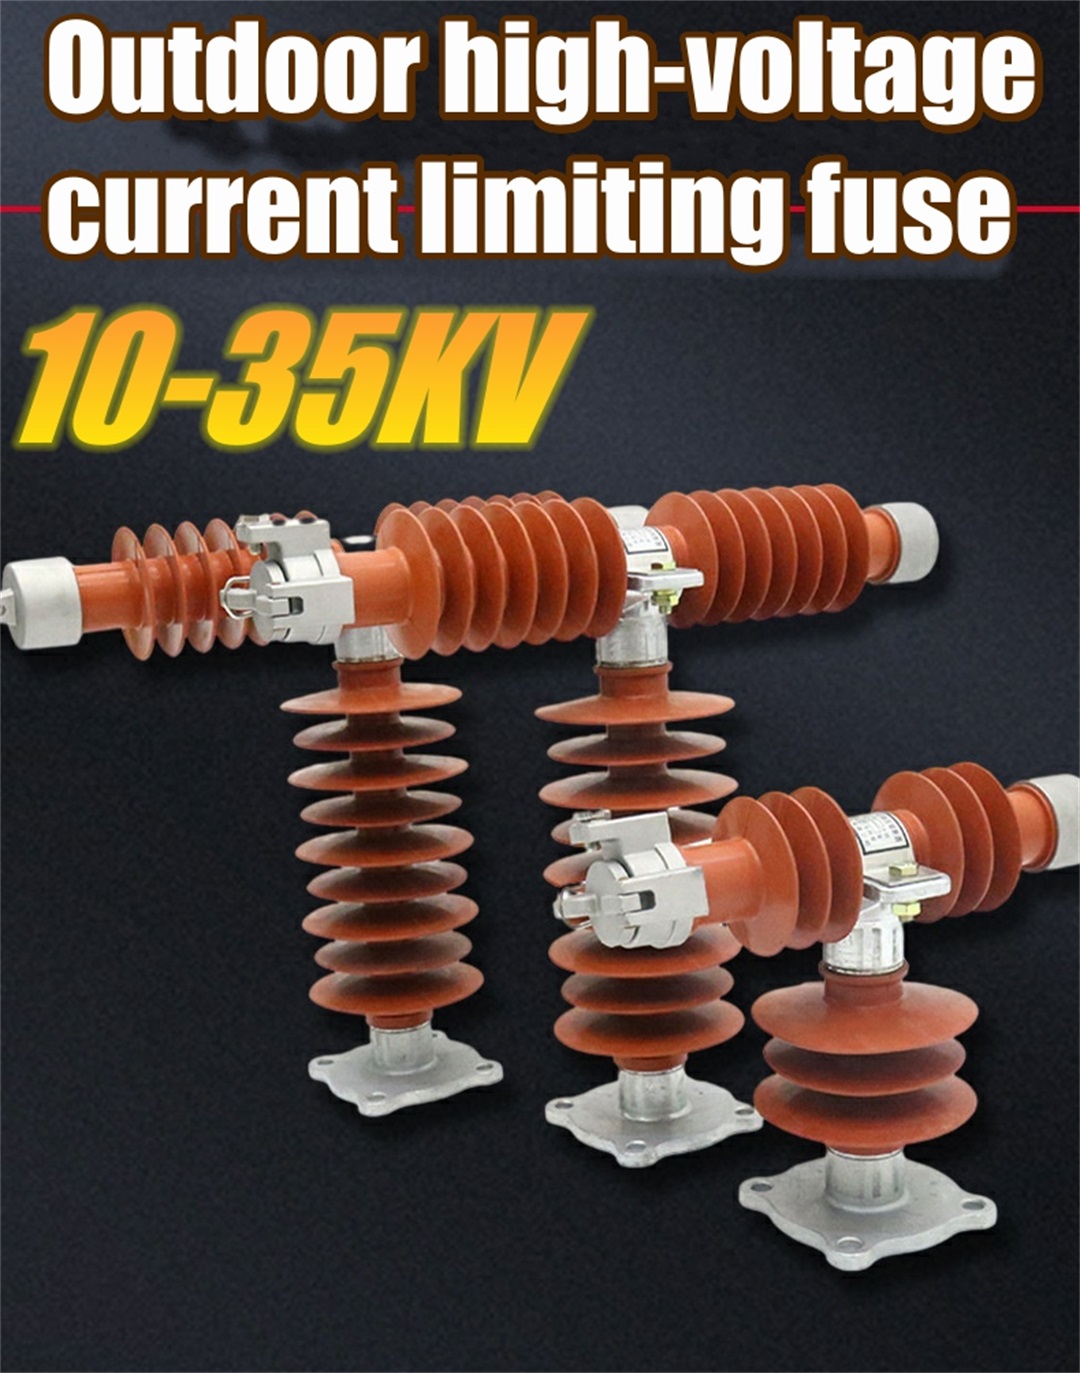 Outdoor high-voltage current limiting fuse